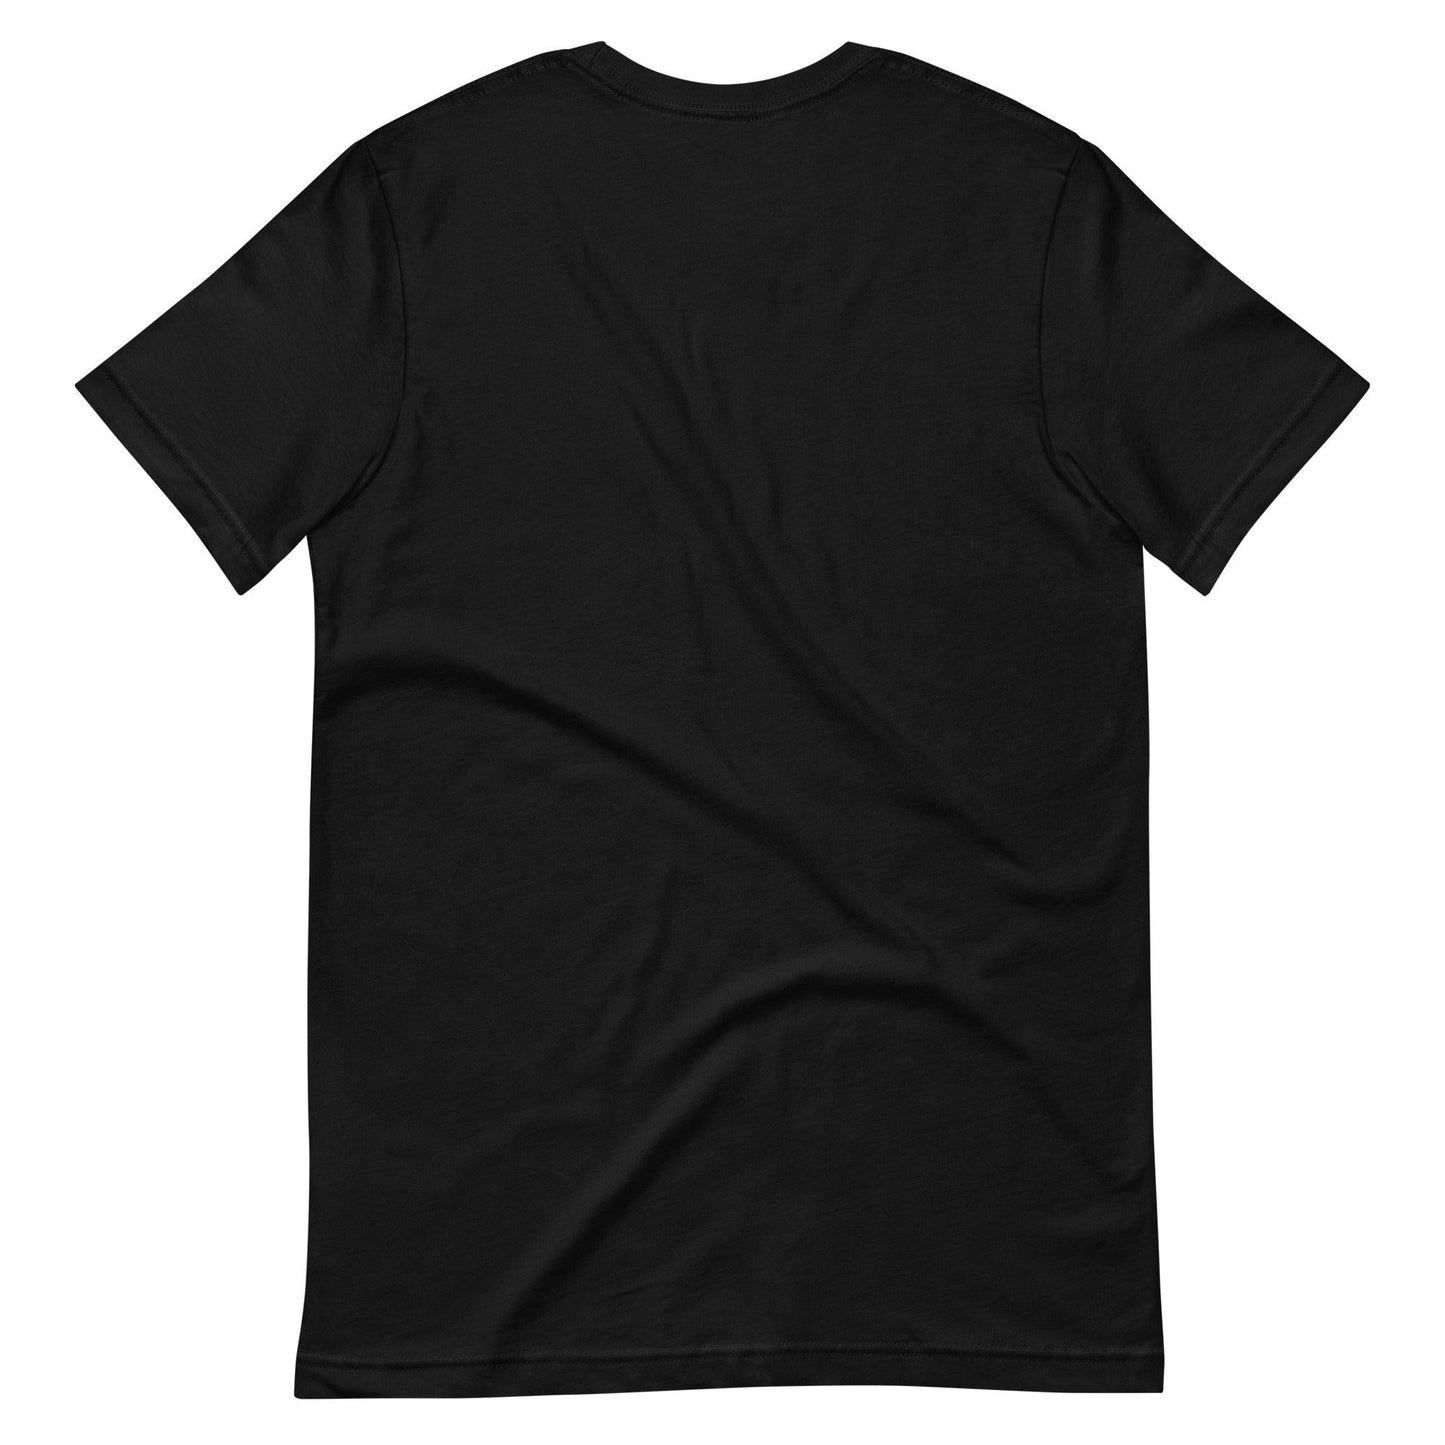 a black t - shirt on a white background